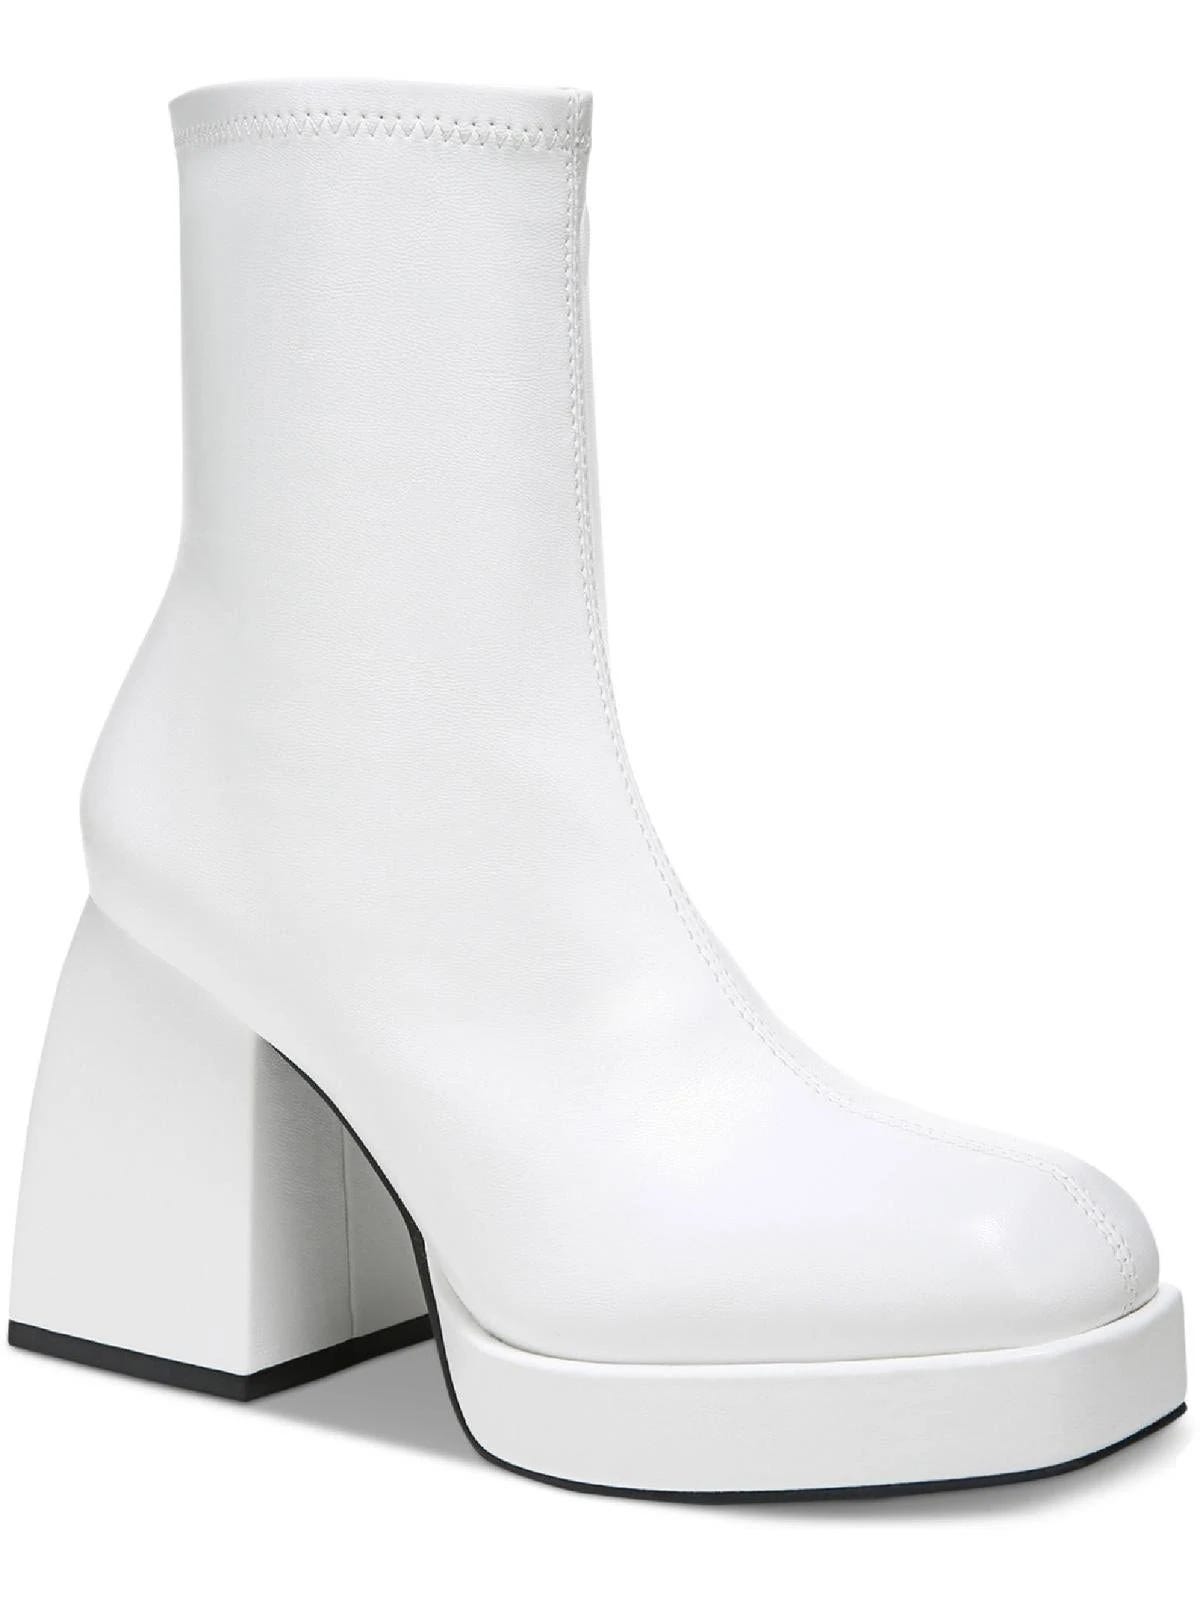 Stylish White Block Heel Ankle Boots for Women | Image